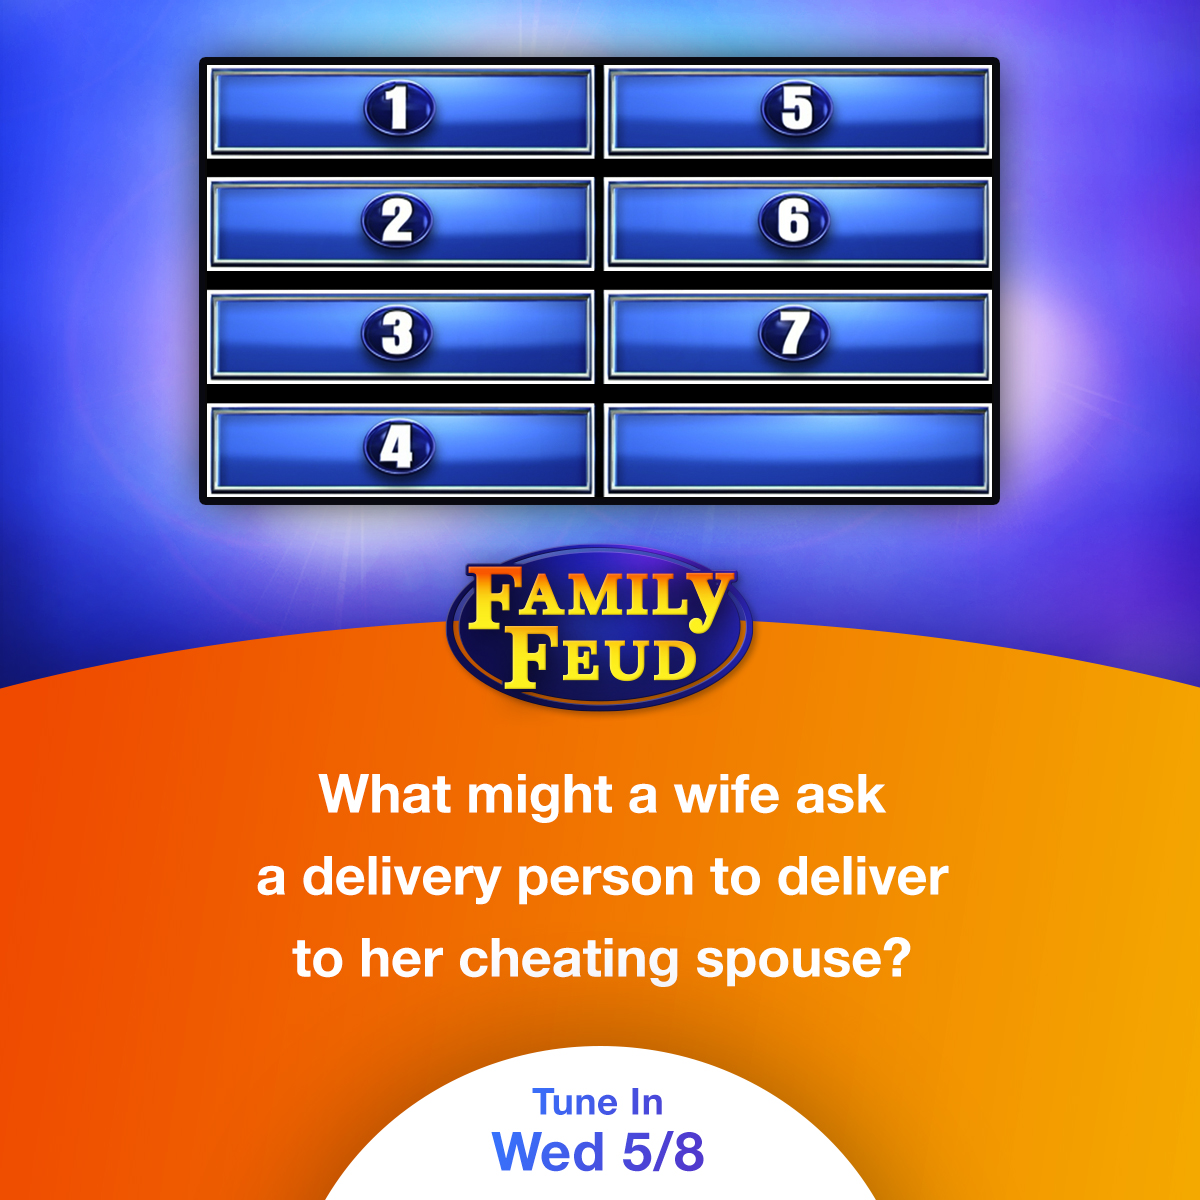 Revenge is a dish best...delivered? 🤔 Place your order below & see what the survey serves up TONIGHT at 6P on #FamilyFeud!